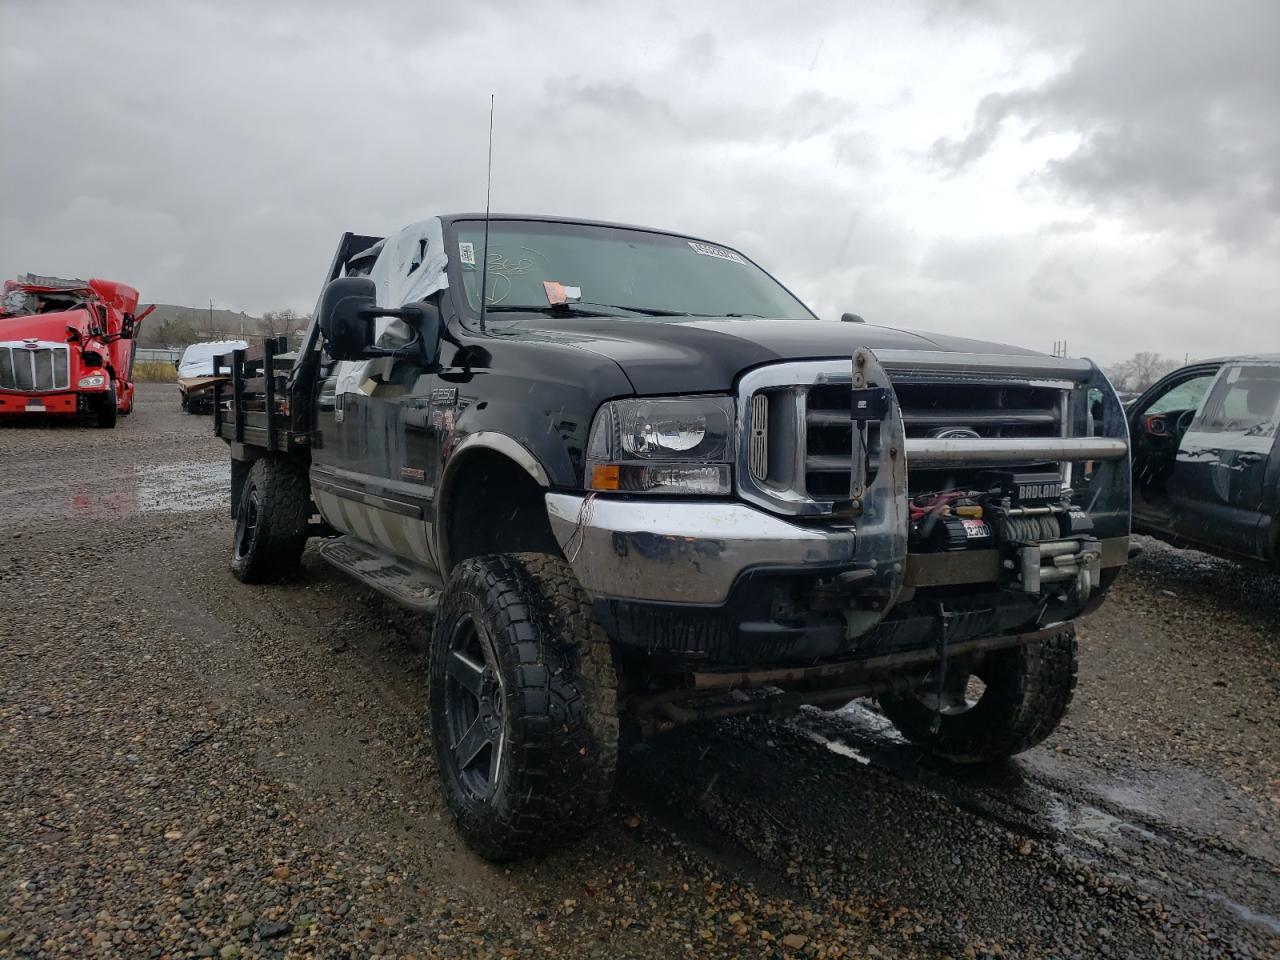 vin: 1FTNX21PX3EB85190 1FTNX21PX3EB85190 2003 ford f250 6000 for Sale in 59101 7318, Mt - Billings, Billings, USA